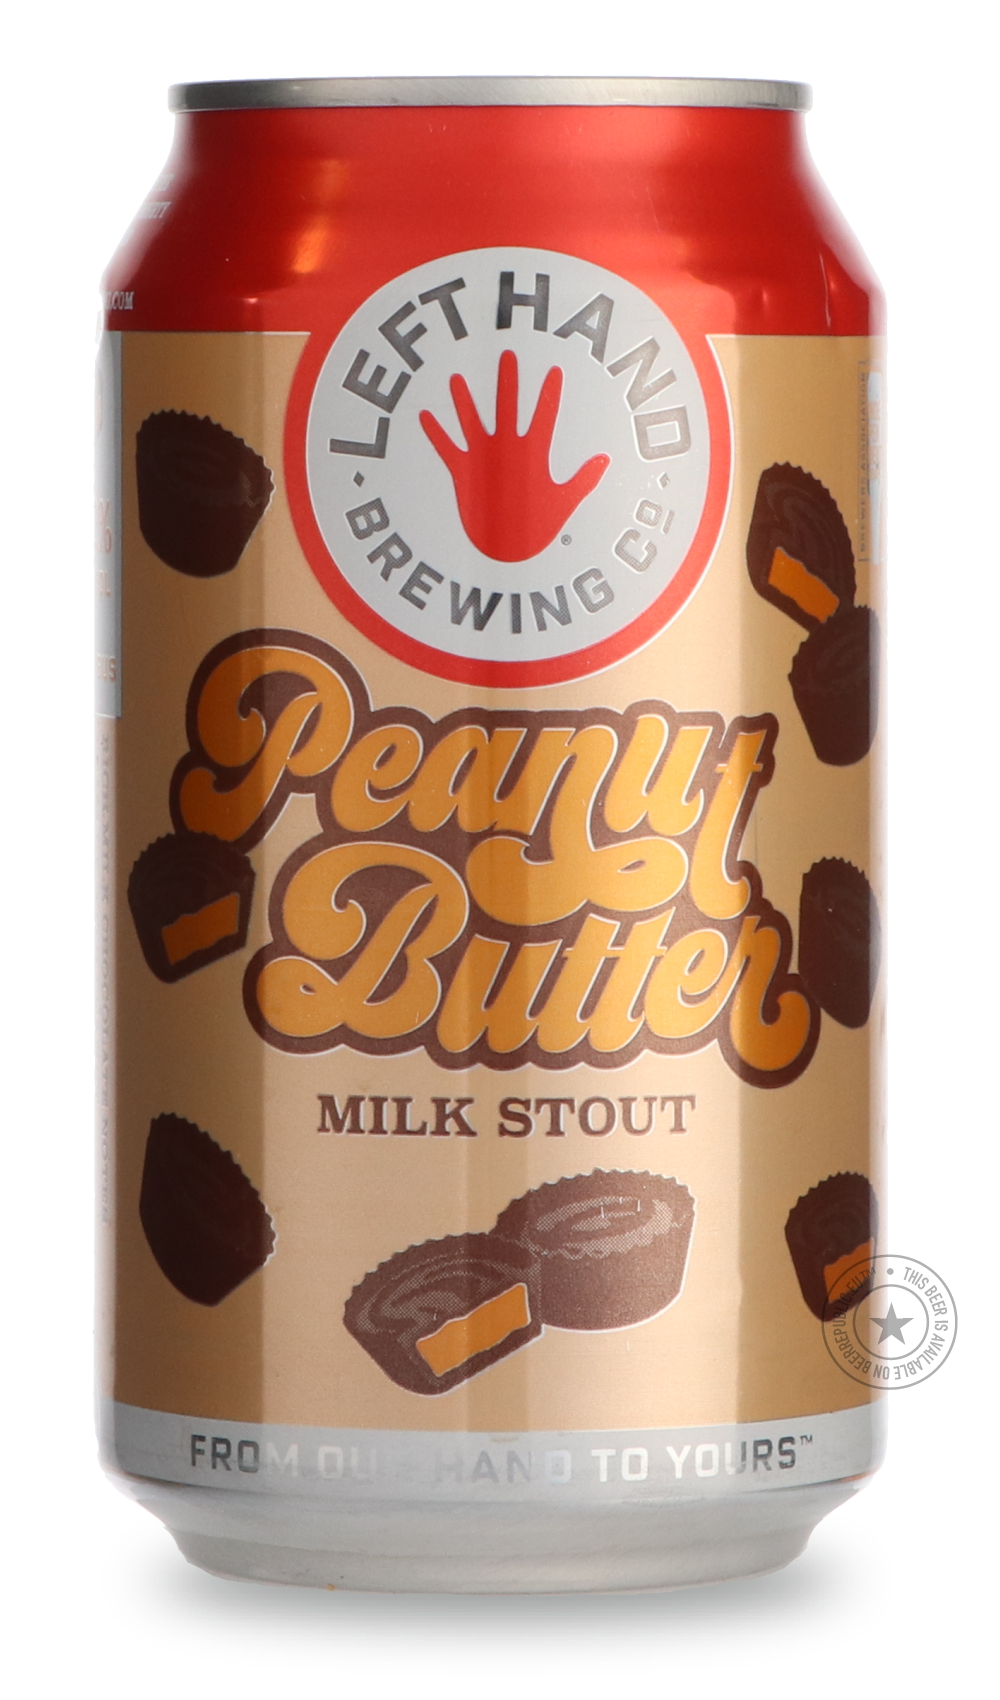 -Left Hand- Peanut Butter Milk Stout-Stout & Porter- Only @ Beer Republic - The best online beer store for American & Canadian craft beer - Buy beer online from the USA and Canada - Bier online kopen - Amerikaans bier kopen - Craft beer store - Craft beer kopen - Amerikanisch bier kaufen - Bier online kaufen - Acheter biere online - IPA - Stout - Porter - New England IPA - Hazy IPA - Imperial Stout - Barrel Aged - Barrel Aged Imperial Stout - Brown - Dark beer - Blond - Blonde - Pilsner - Lager - Wheat - We